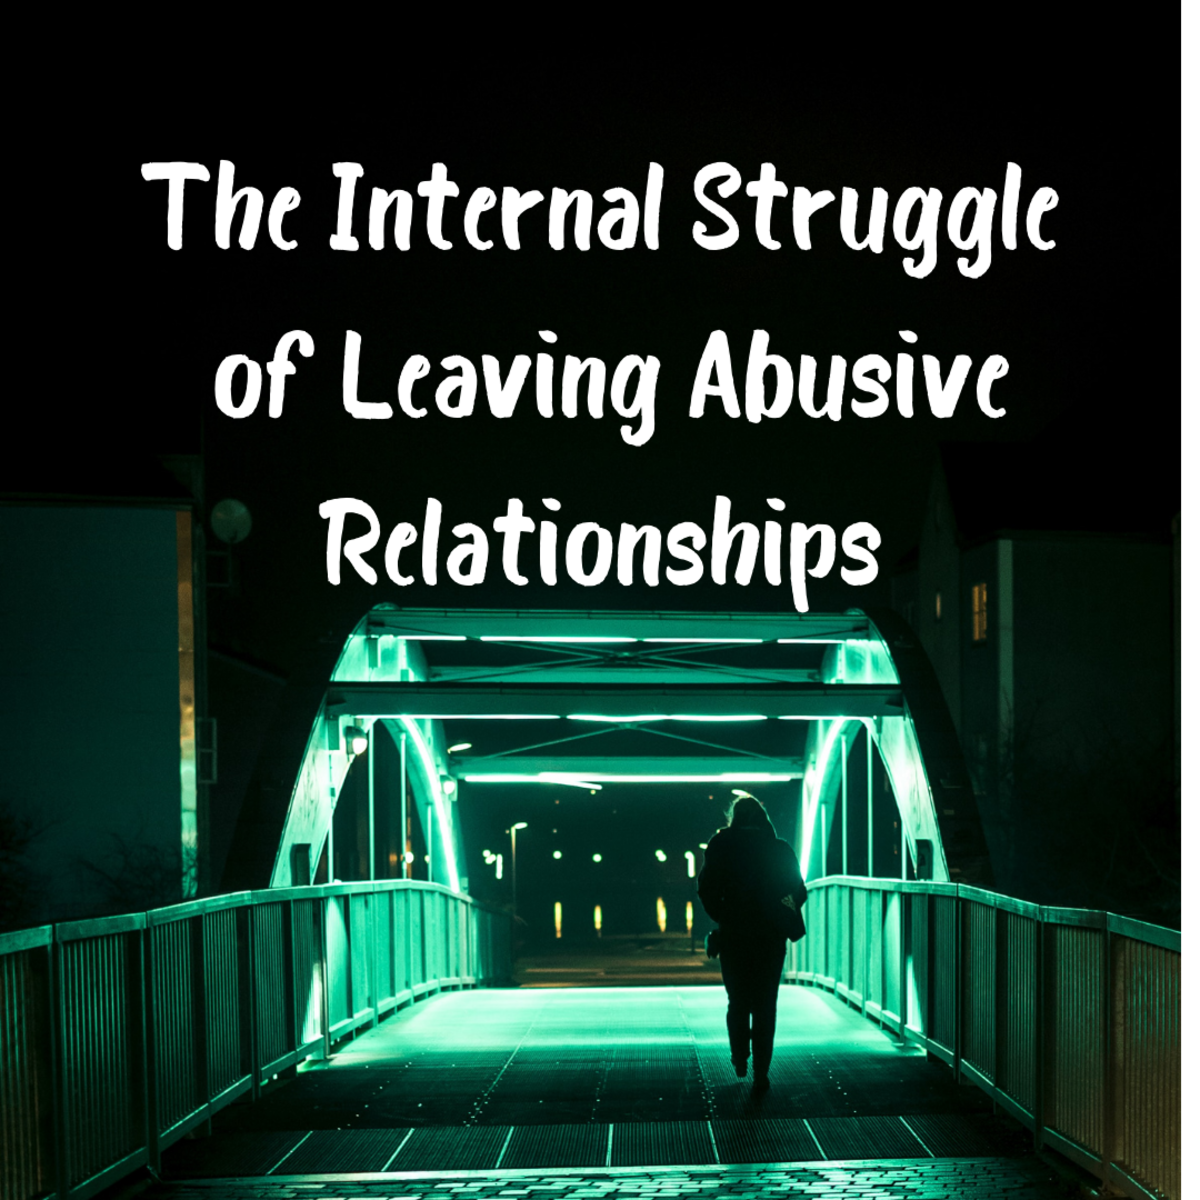 The Internal Struggle of Leaving Abusive Relationships